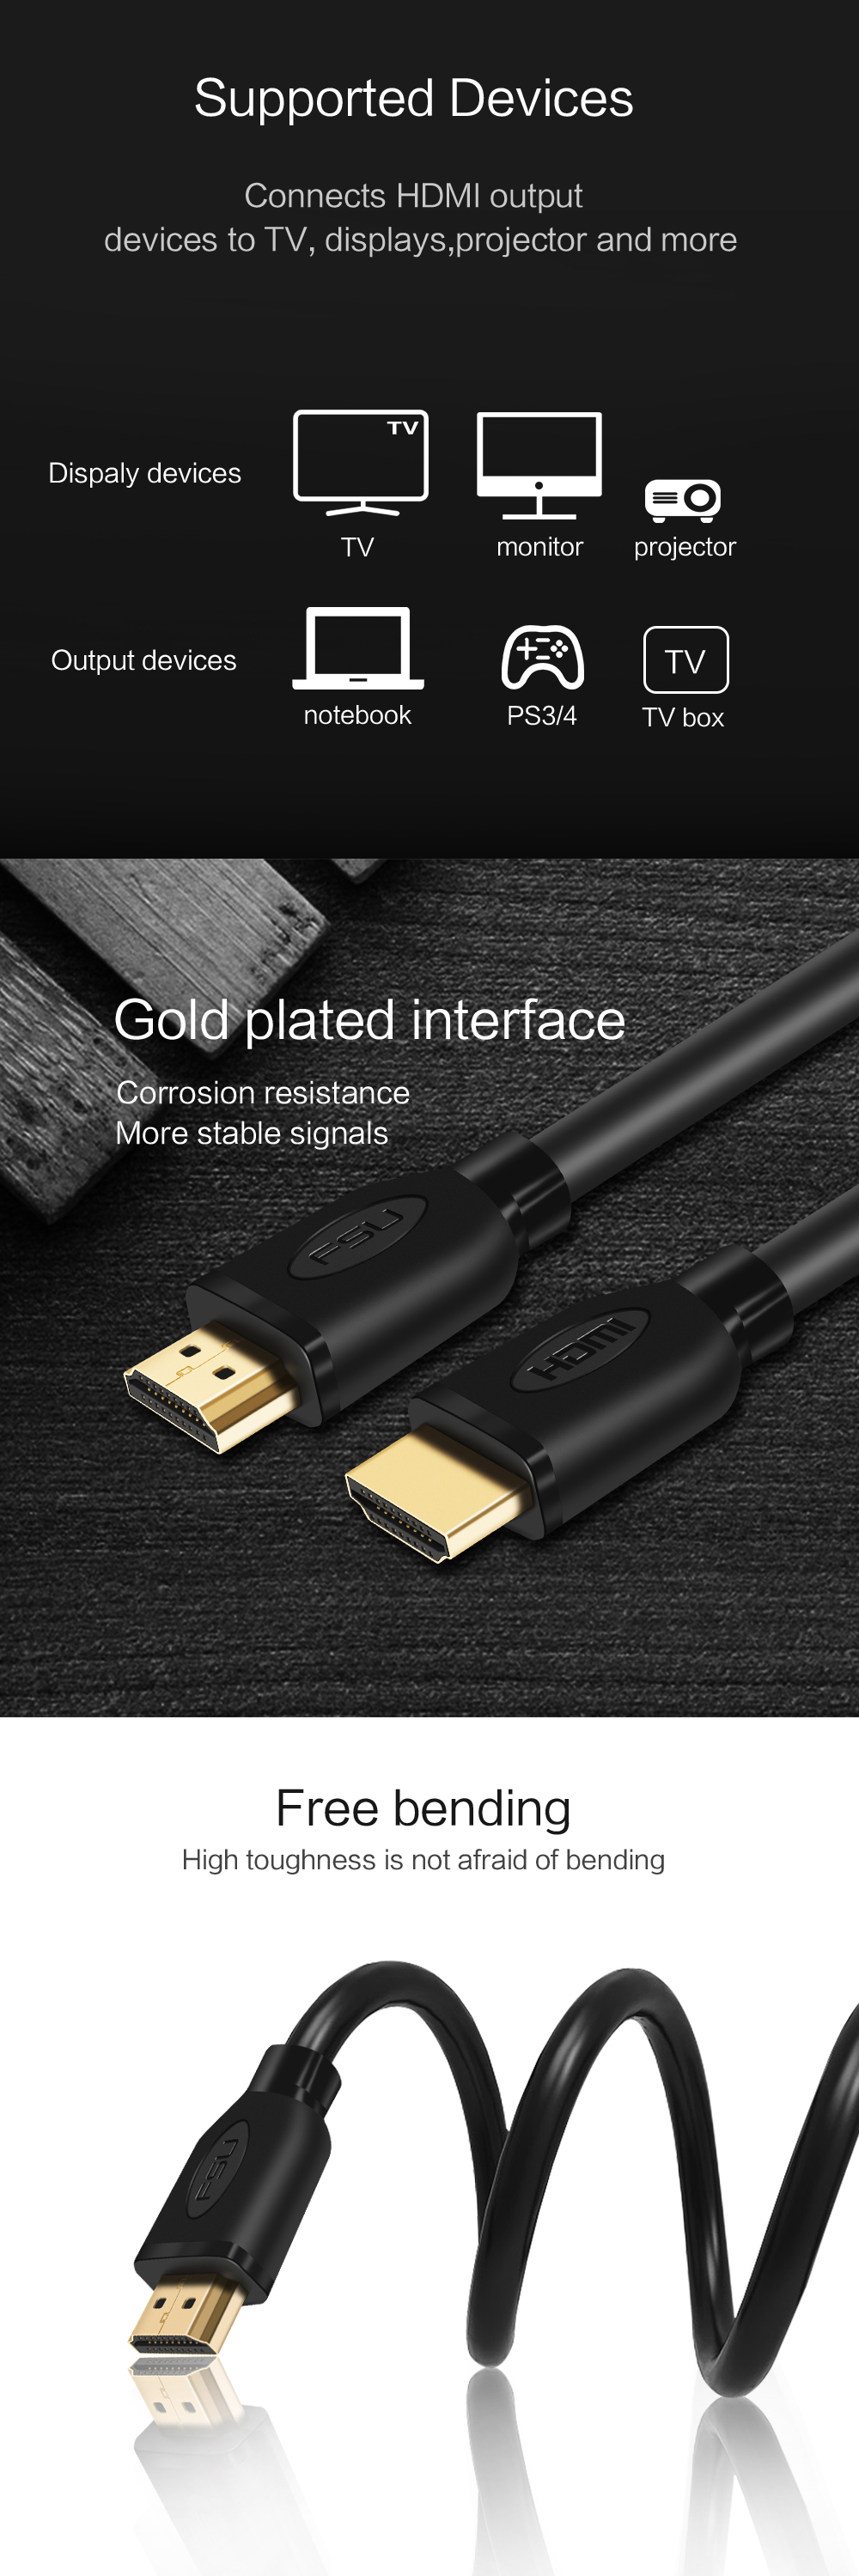 FSU Gold-plated HDMI Cable 4K 1080P Male to Male Adapter Cable for HDTV LCD Projector